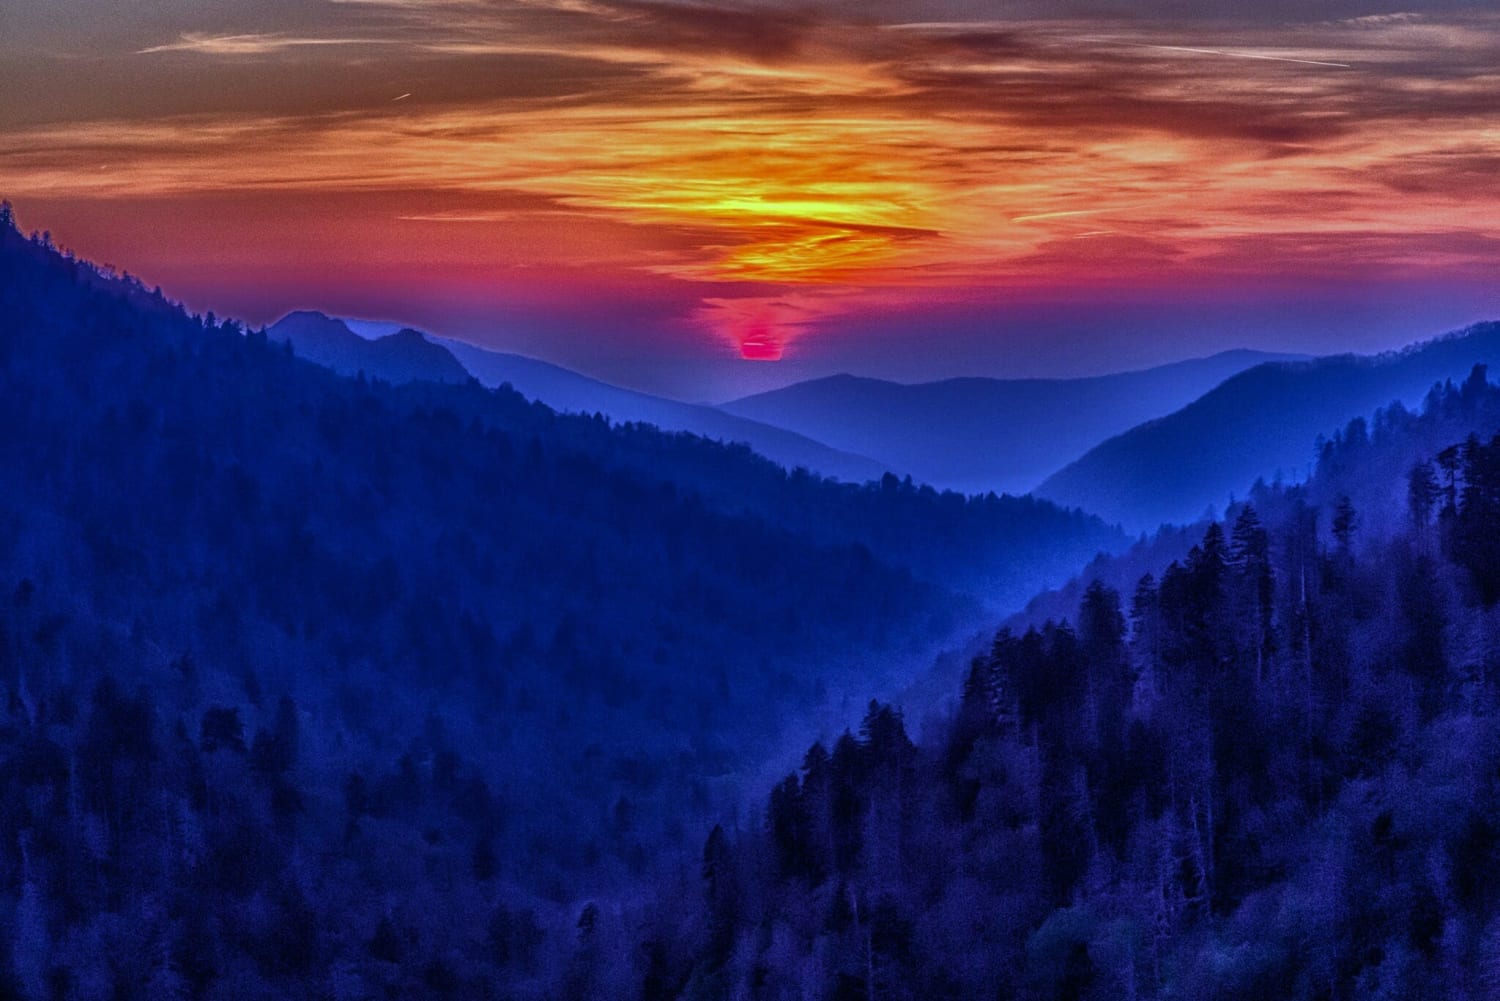 16 Instagram Worthy Photo Spots in Great Smoky Mountains National Park